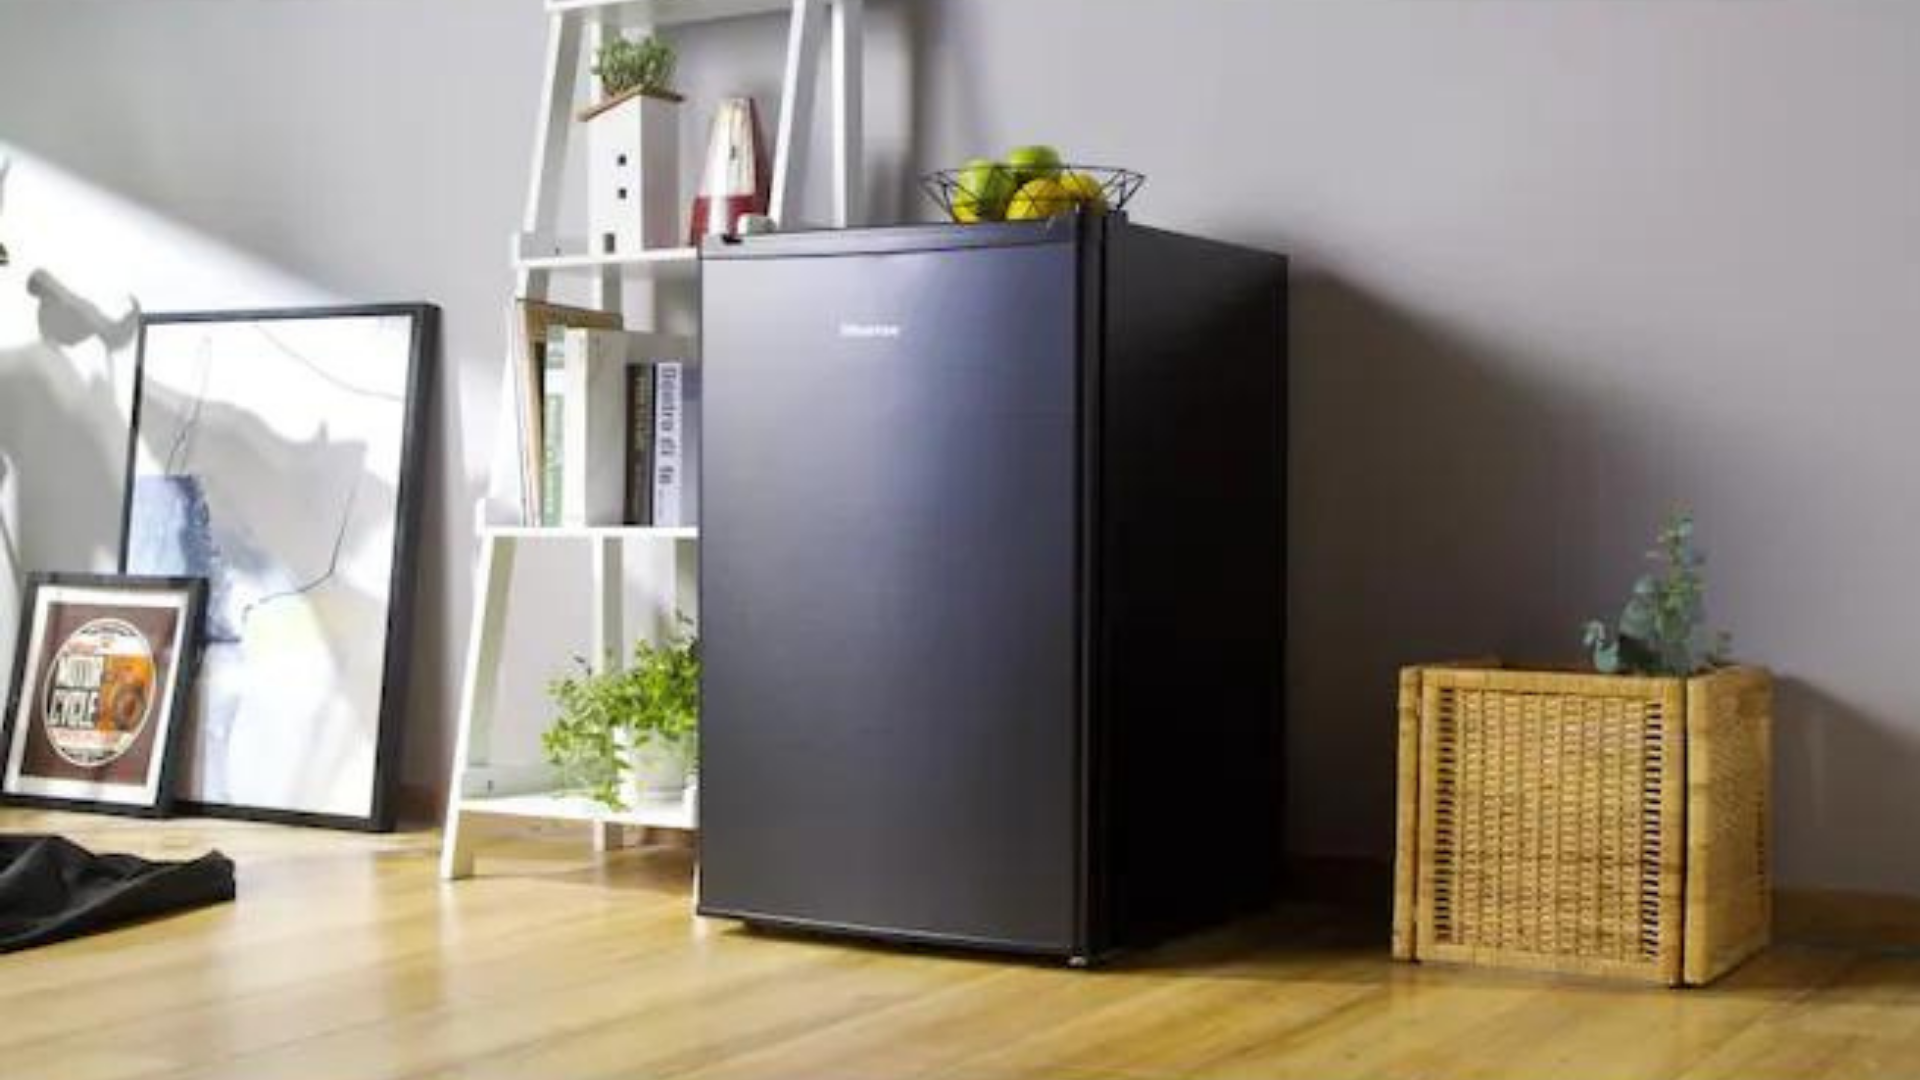 Hisense has a 4.5-star rating from reviewers who love this model for its crisp storage and temperature that will keep all your groceries long.